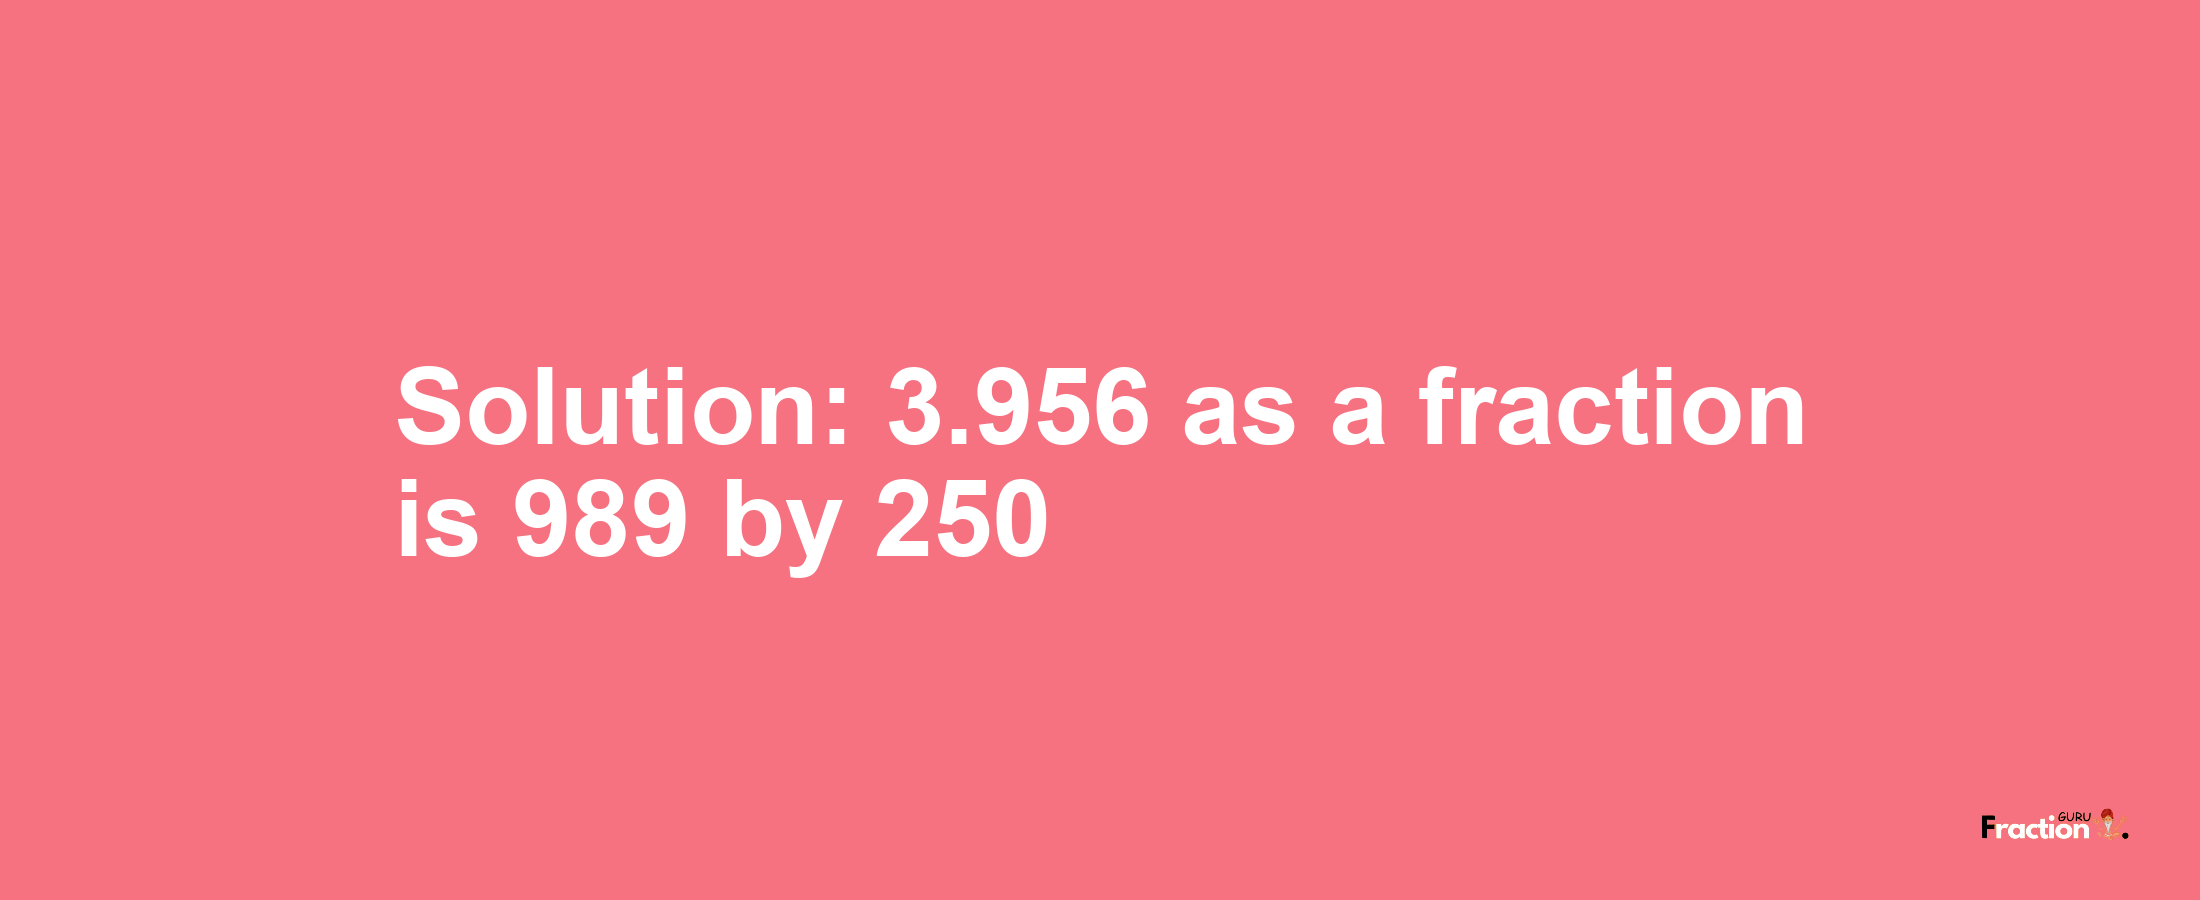 Solution:3.956 as a fraction is 989/250